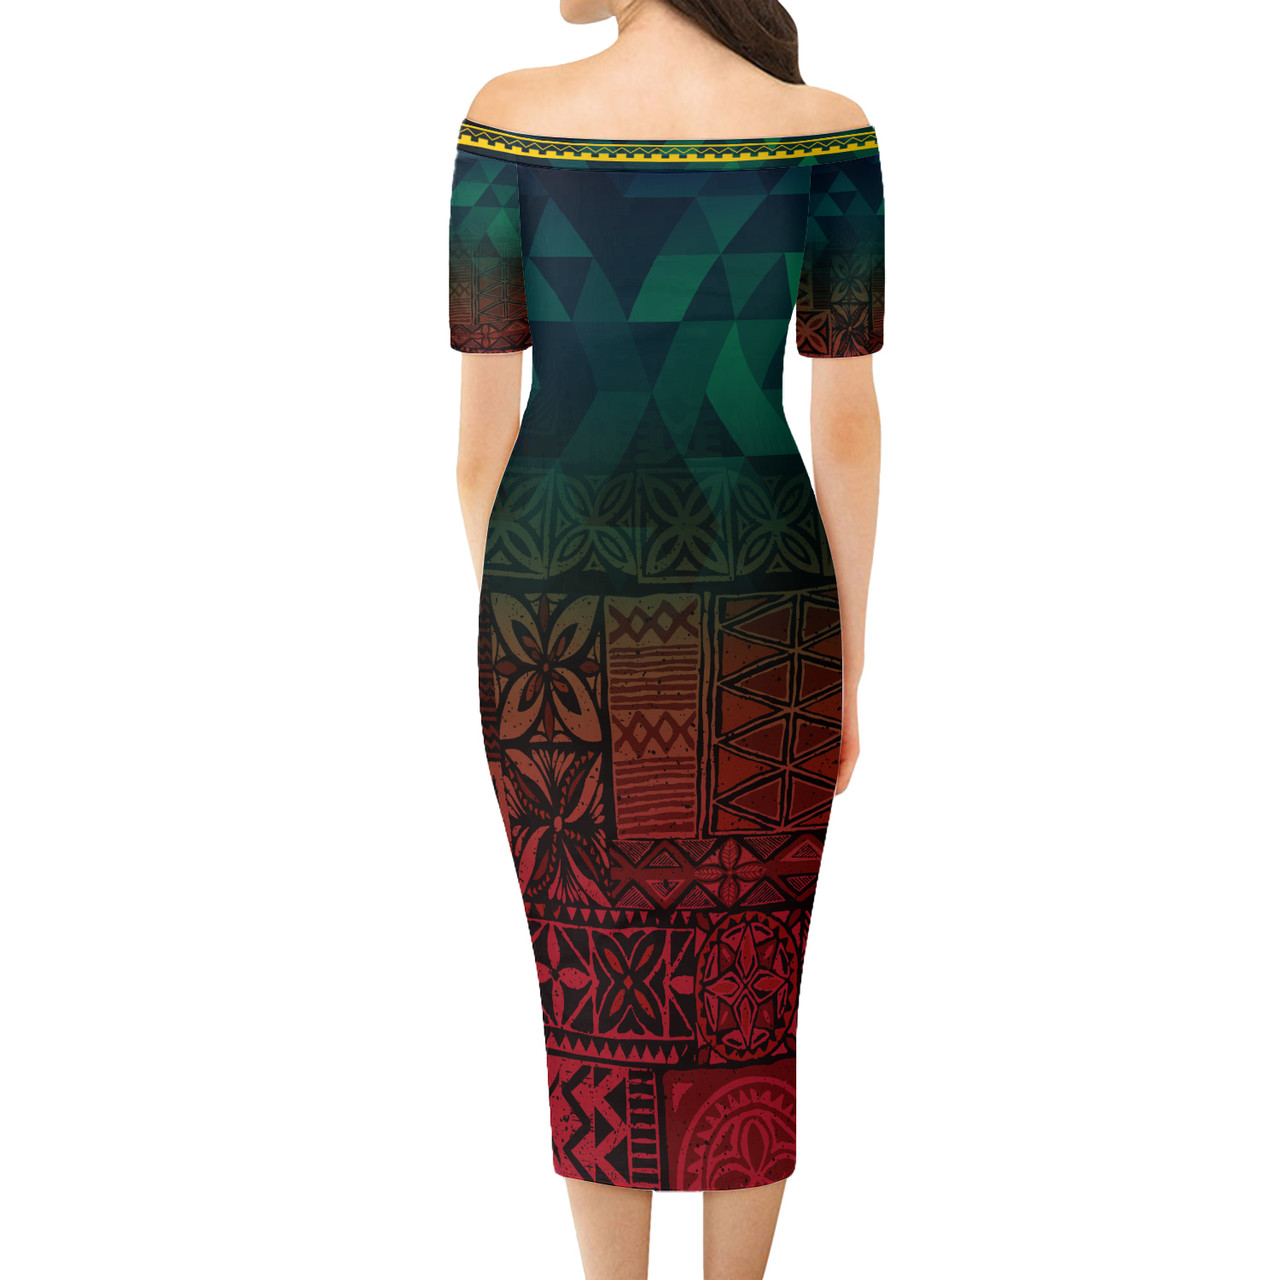 Vanuatu Short Sleeve Off The Shoulder Lady Dress Lowpolly With Tribal Motif